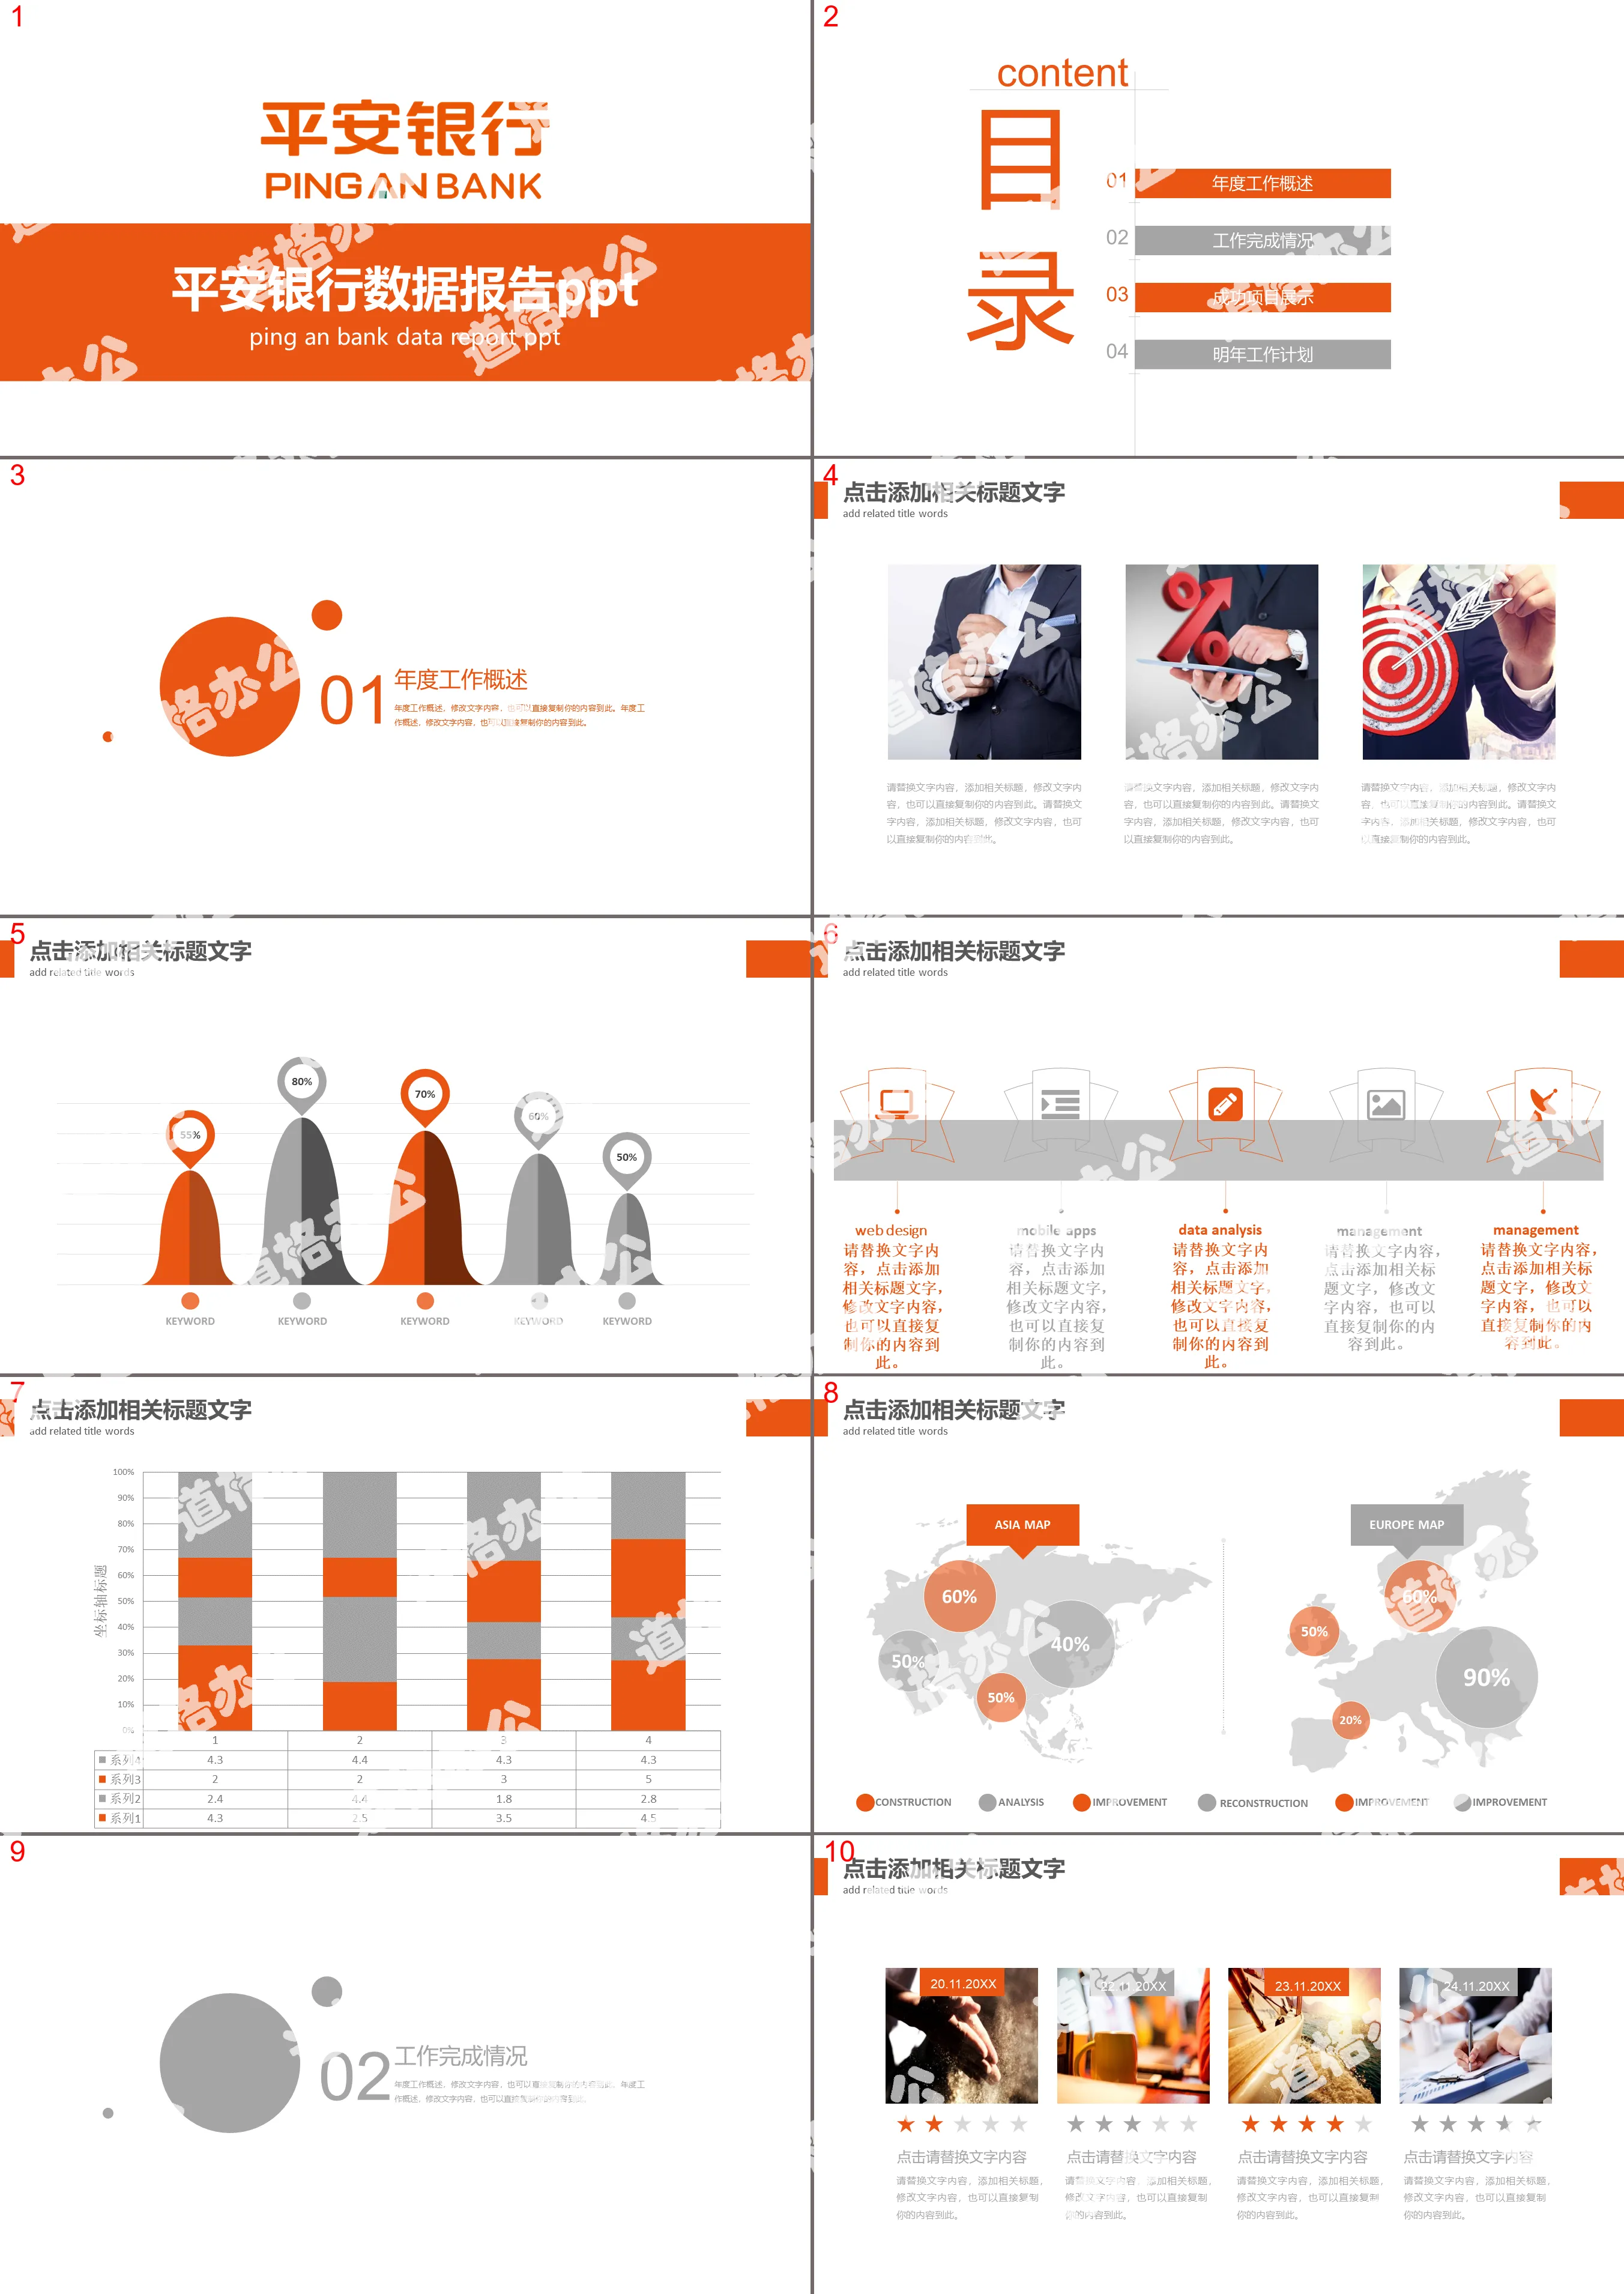 Simple Orange Ping An Bank Data Report PPT Template